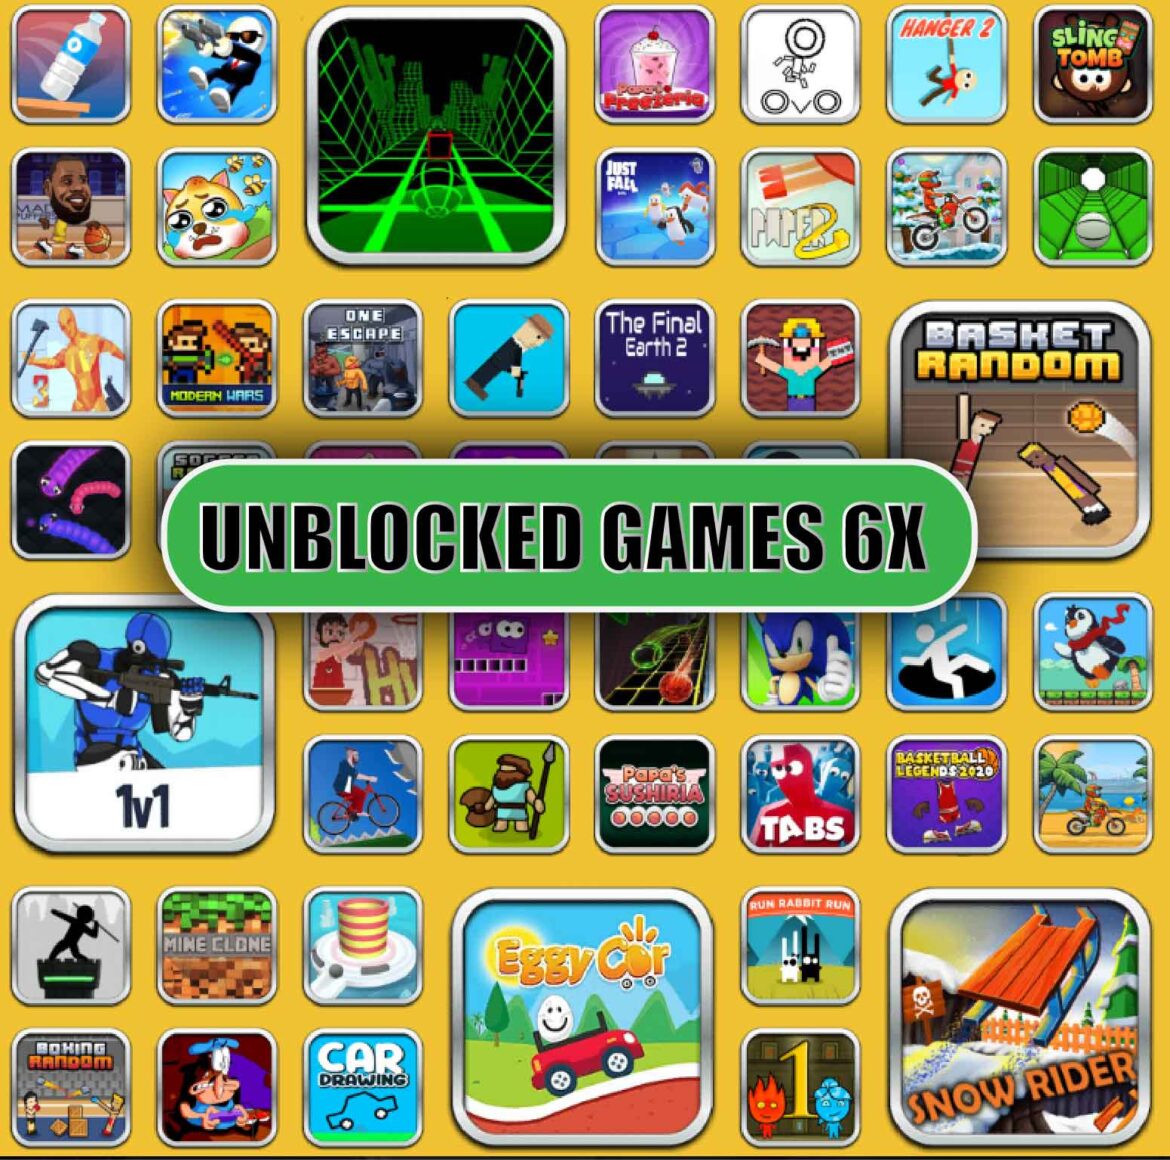 Benefits of Unblocked Games 6x and Skip the Games Overview